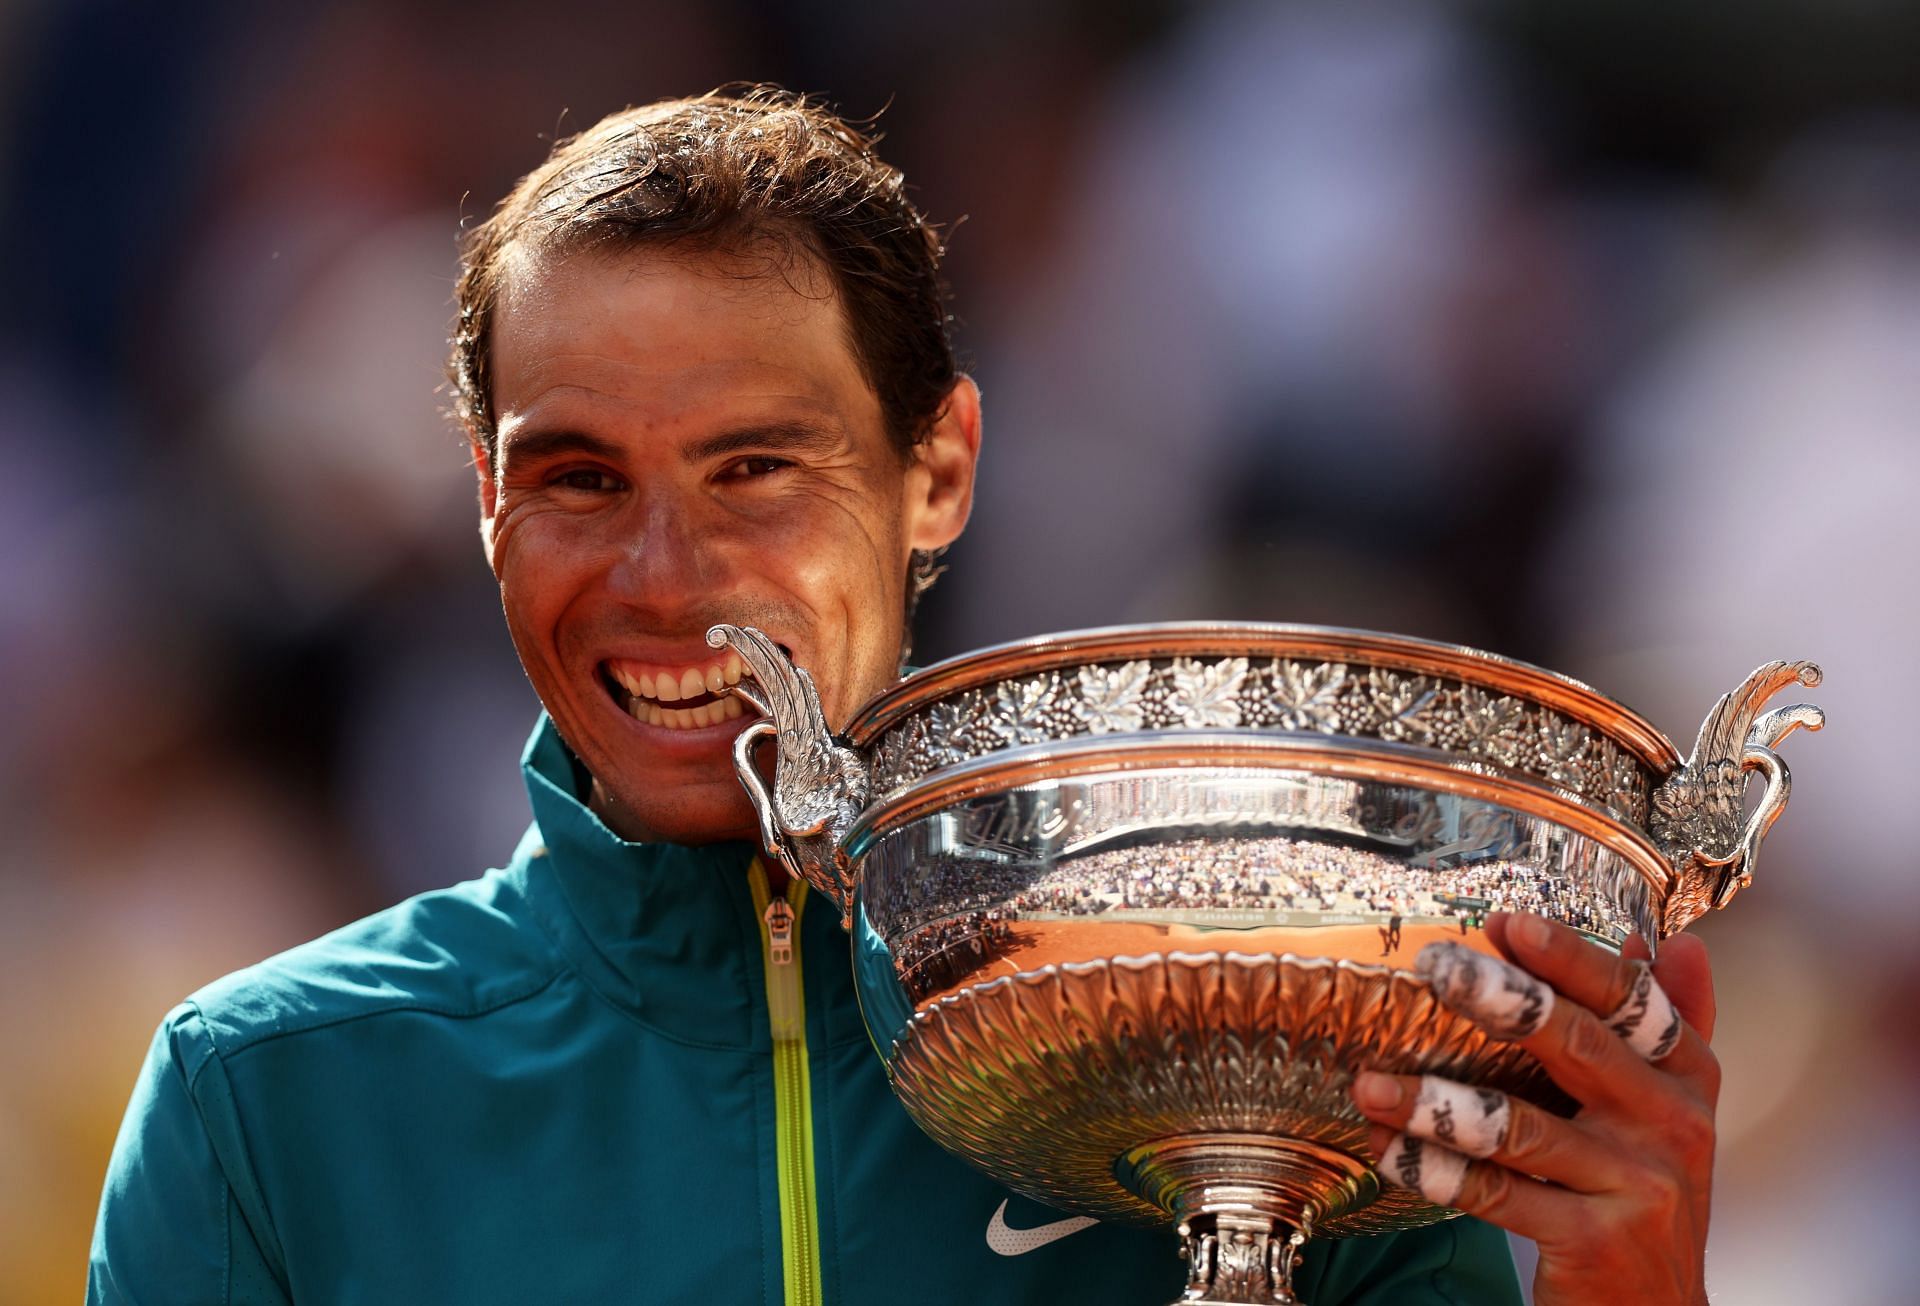 Rafael Nadal won his most-recent title at the French Open in 2022